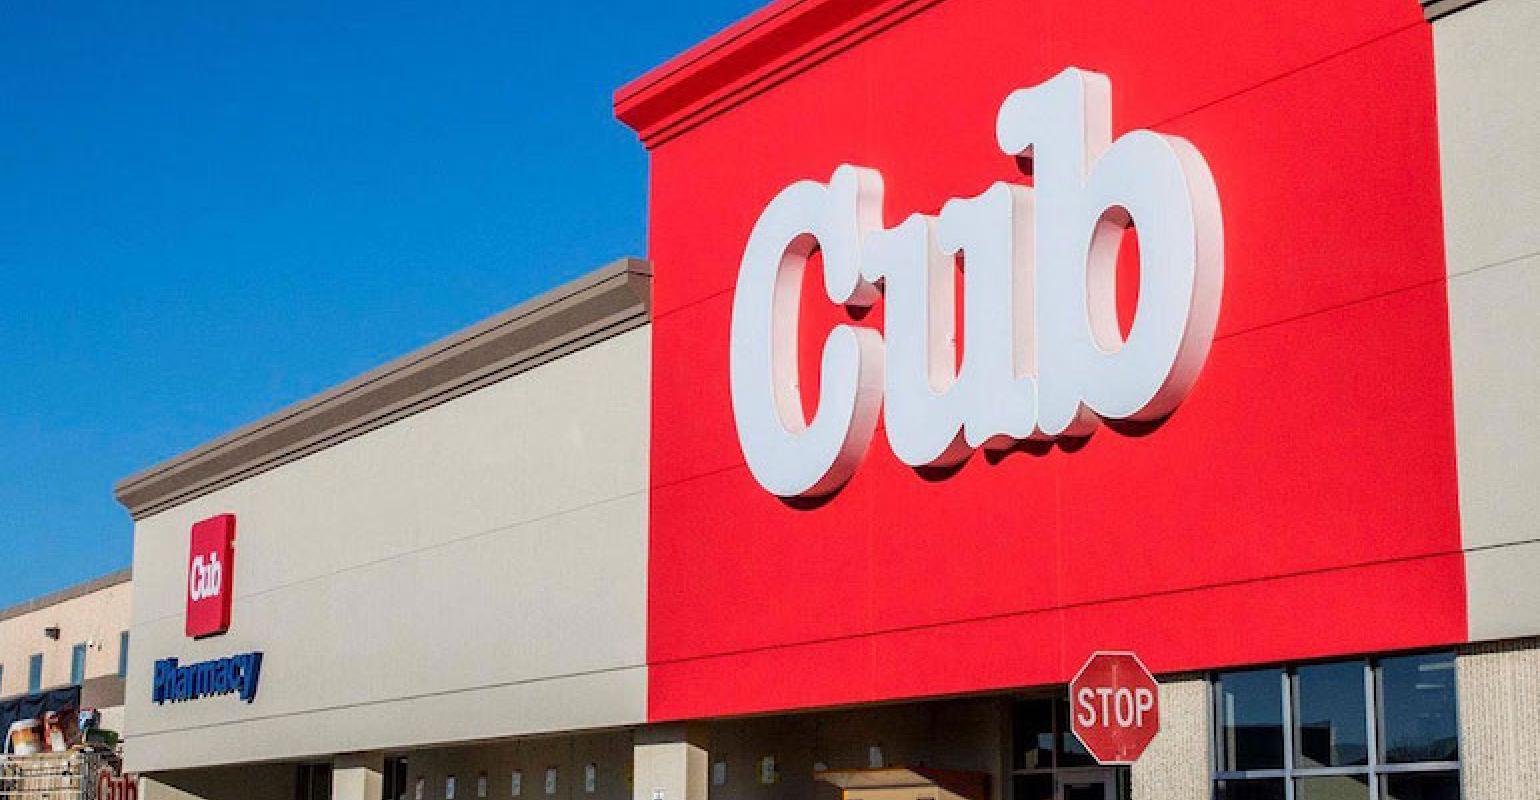 Cub Foods makes personalization play Supermarket News